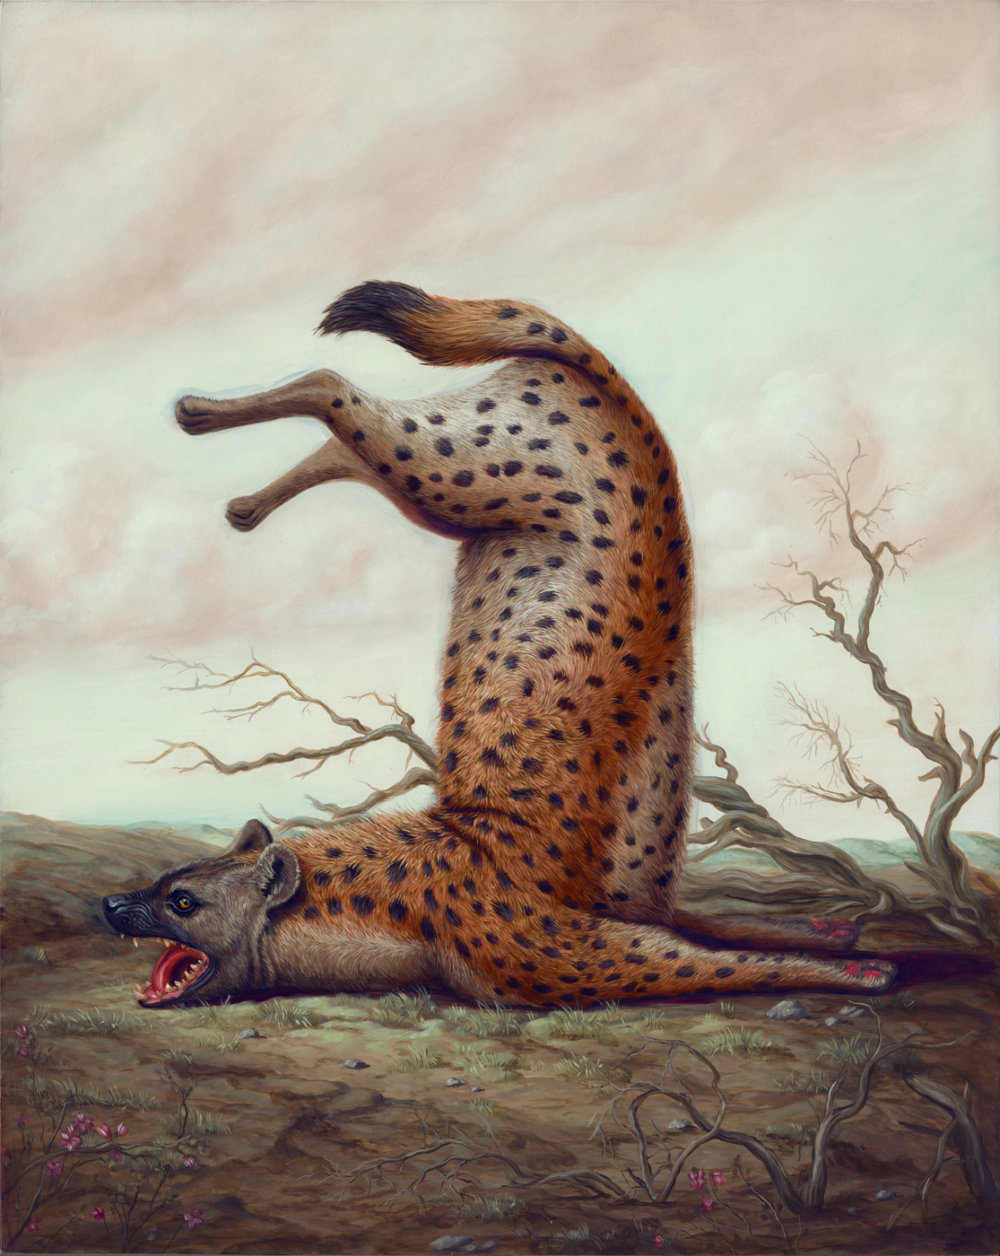 The Absurdly Distorted And Twisted Animal Paintings Of Bruno Pontiroli 11